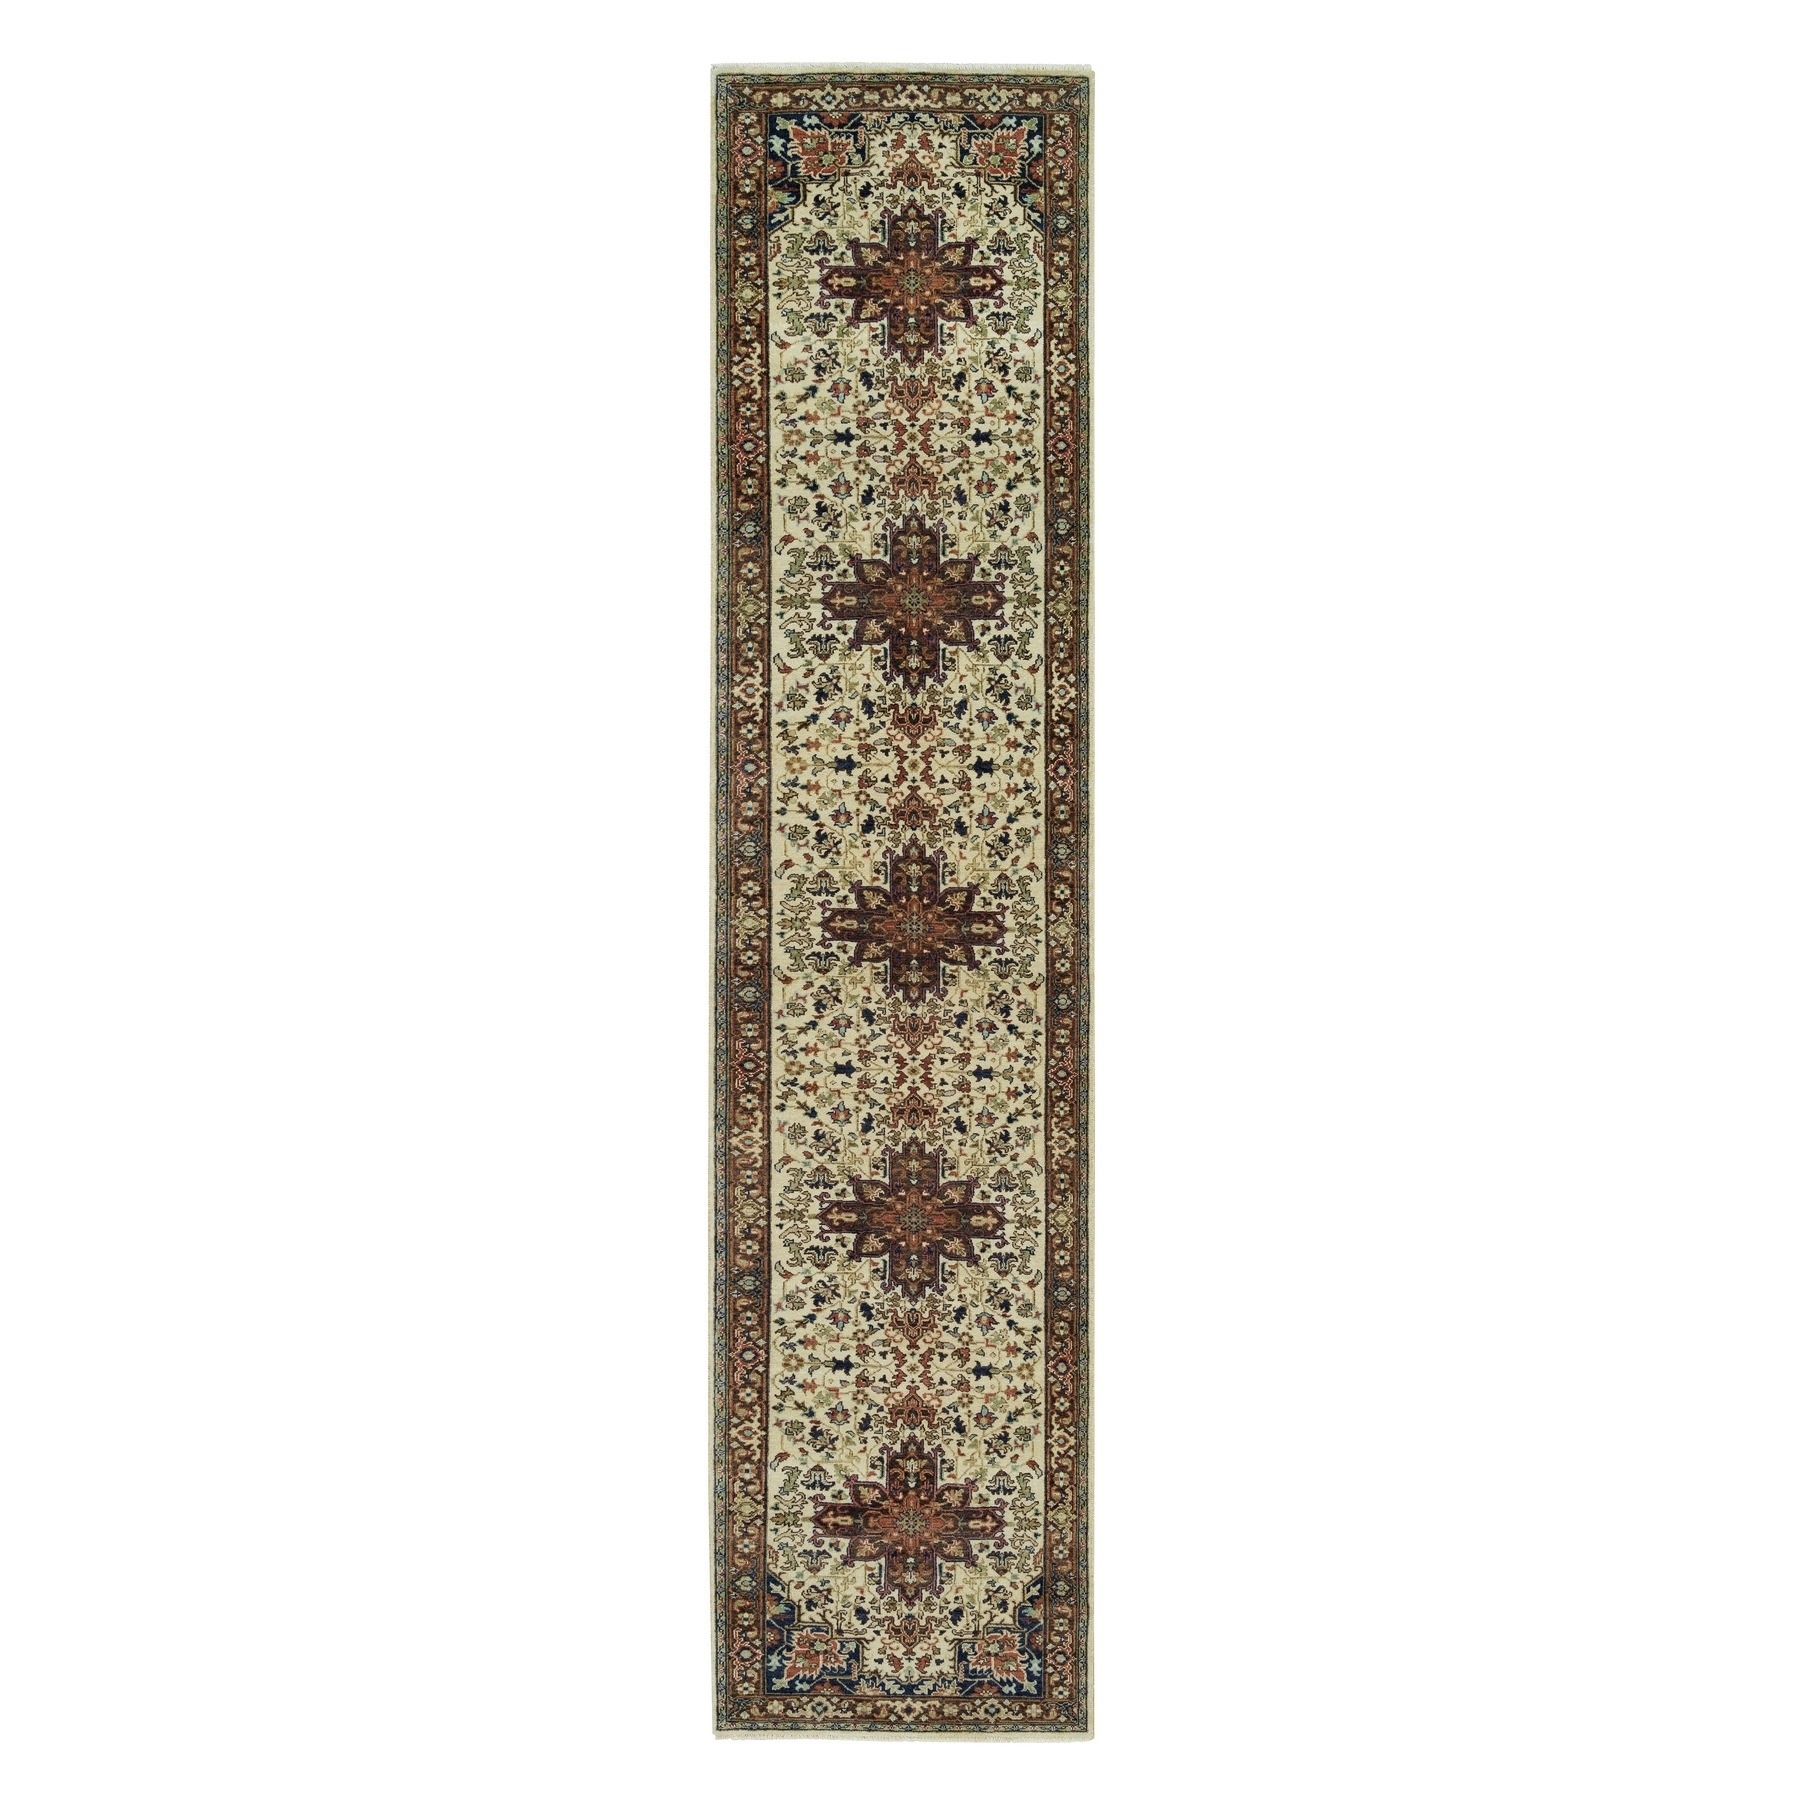 2'8"x12'3" Cosmic Latte Beige, Vegetable Dyes, Antiqued Heriz Re-Creation with Geometric Medallions, Extra Soft Wool, Soft and Lush Pile, Hand Woven, Runner Oriental Rug 